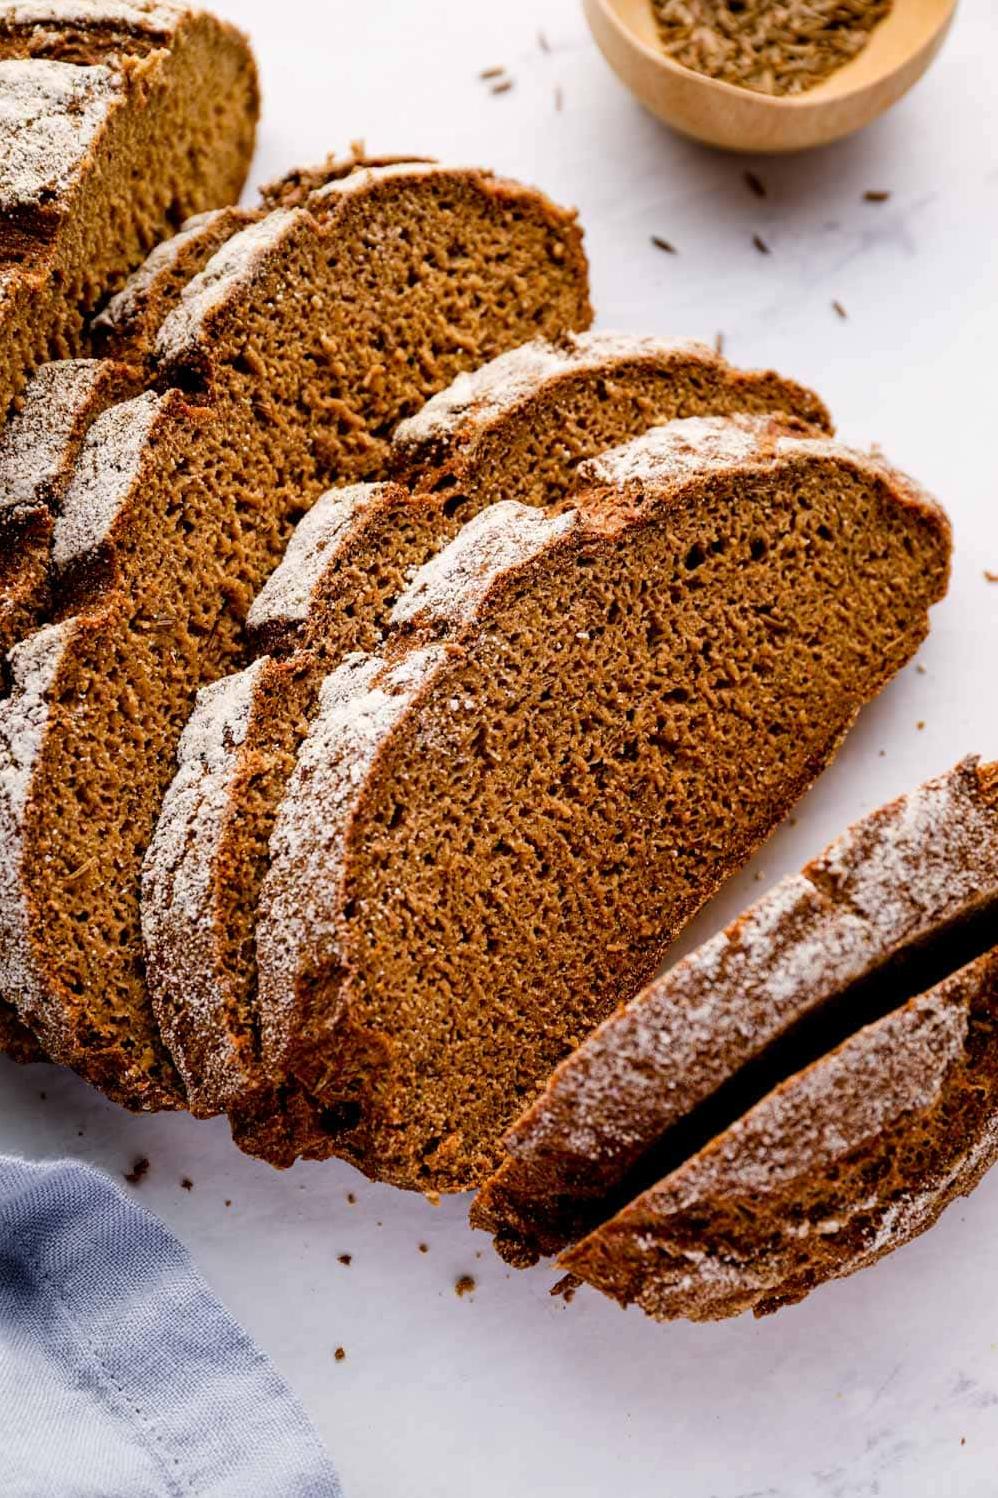  You won’t miss the gluten with this flavorful rye bread